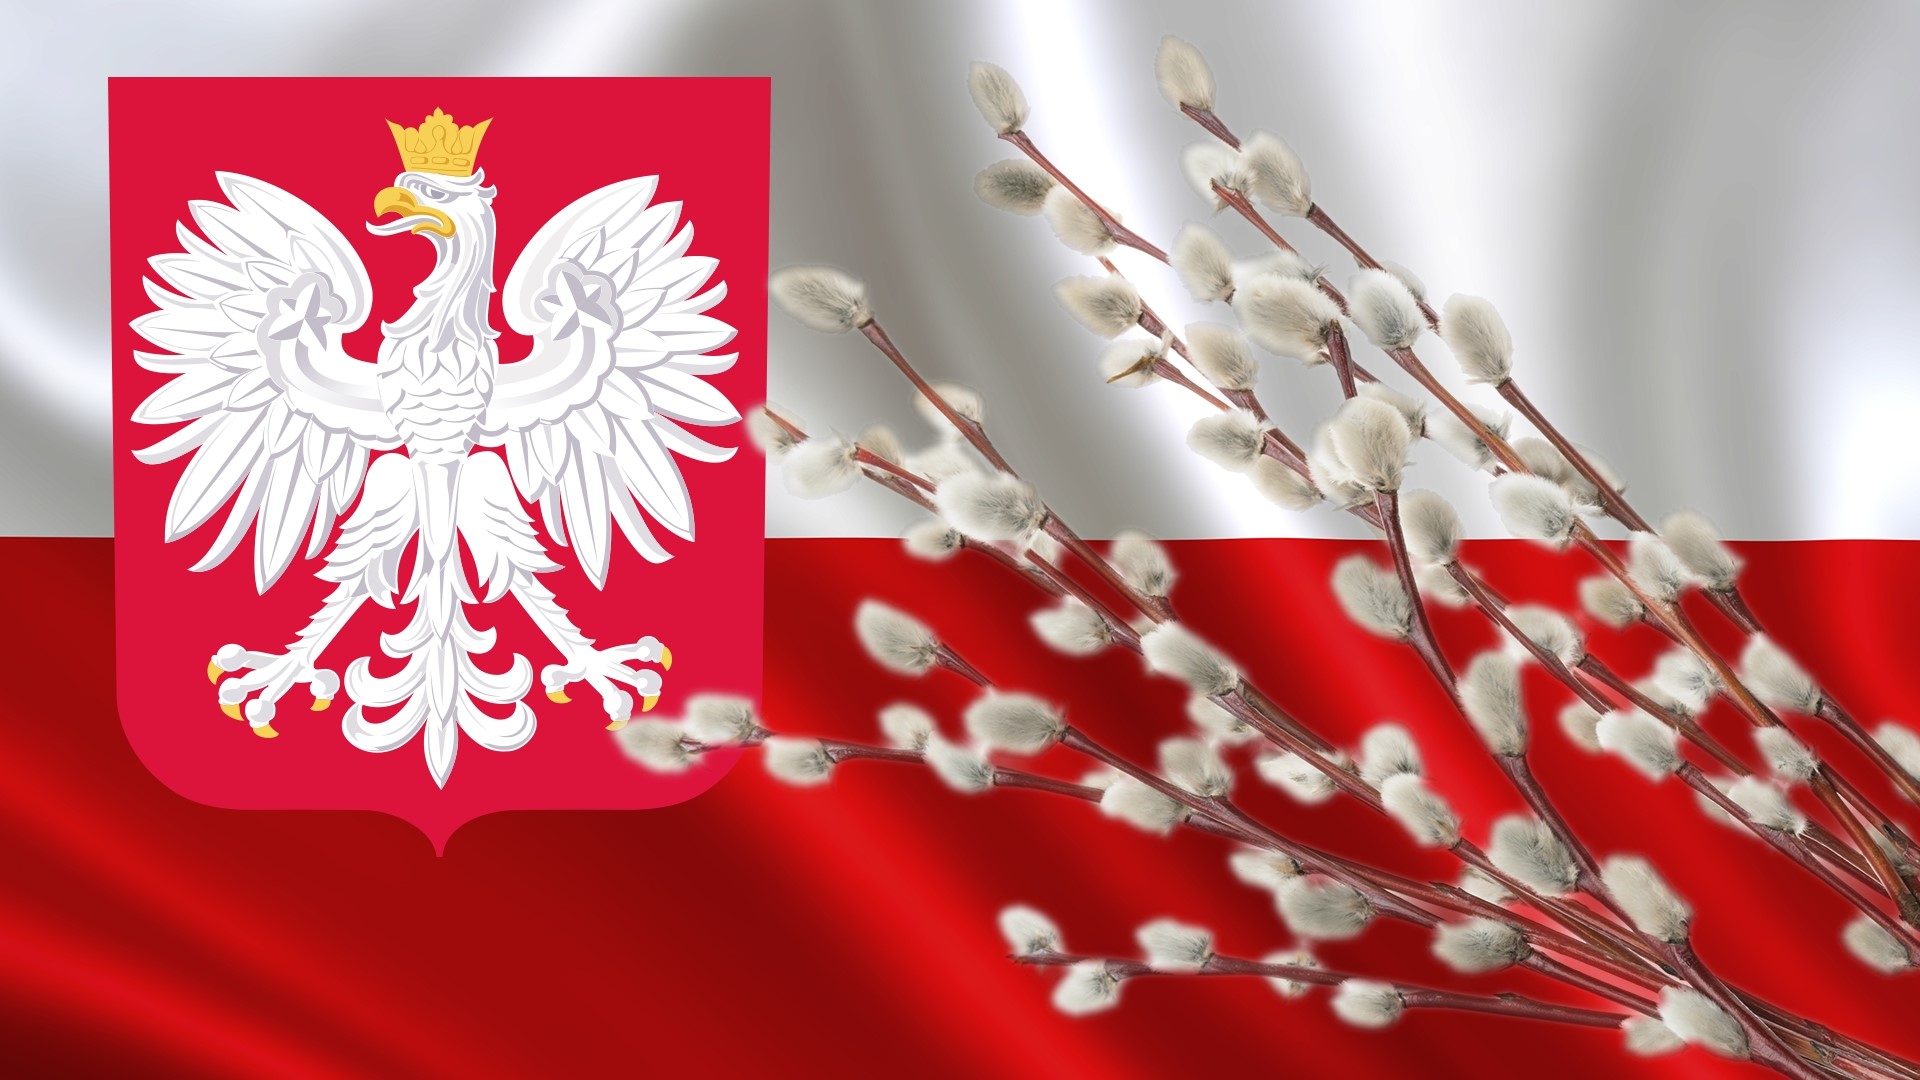 It's a tradition that dates back to 966 AD in Poland, and here in Northwest Ohio, the rich Polish makeup continues to remember and celebrate the unique holiday.